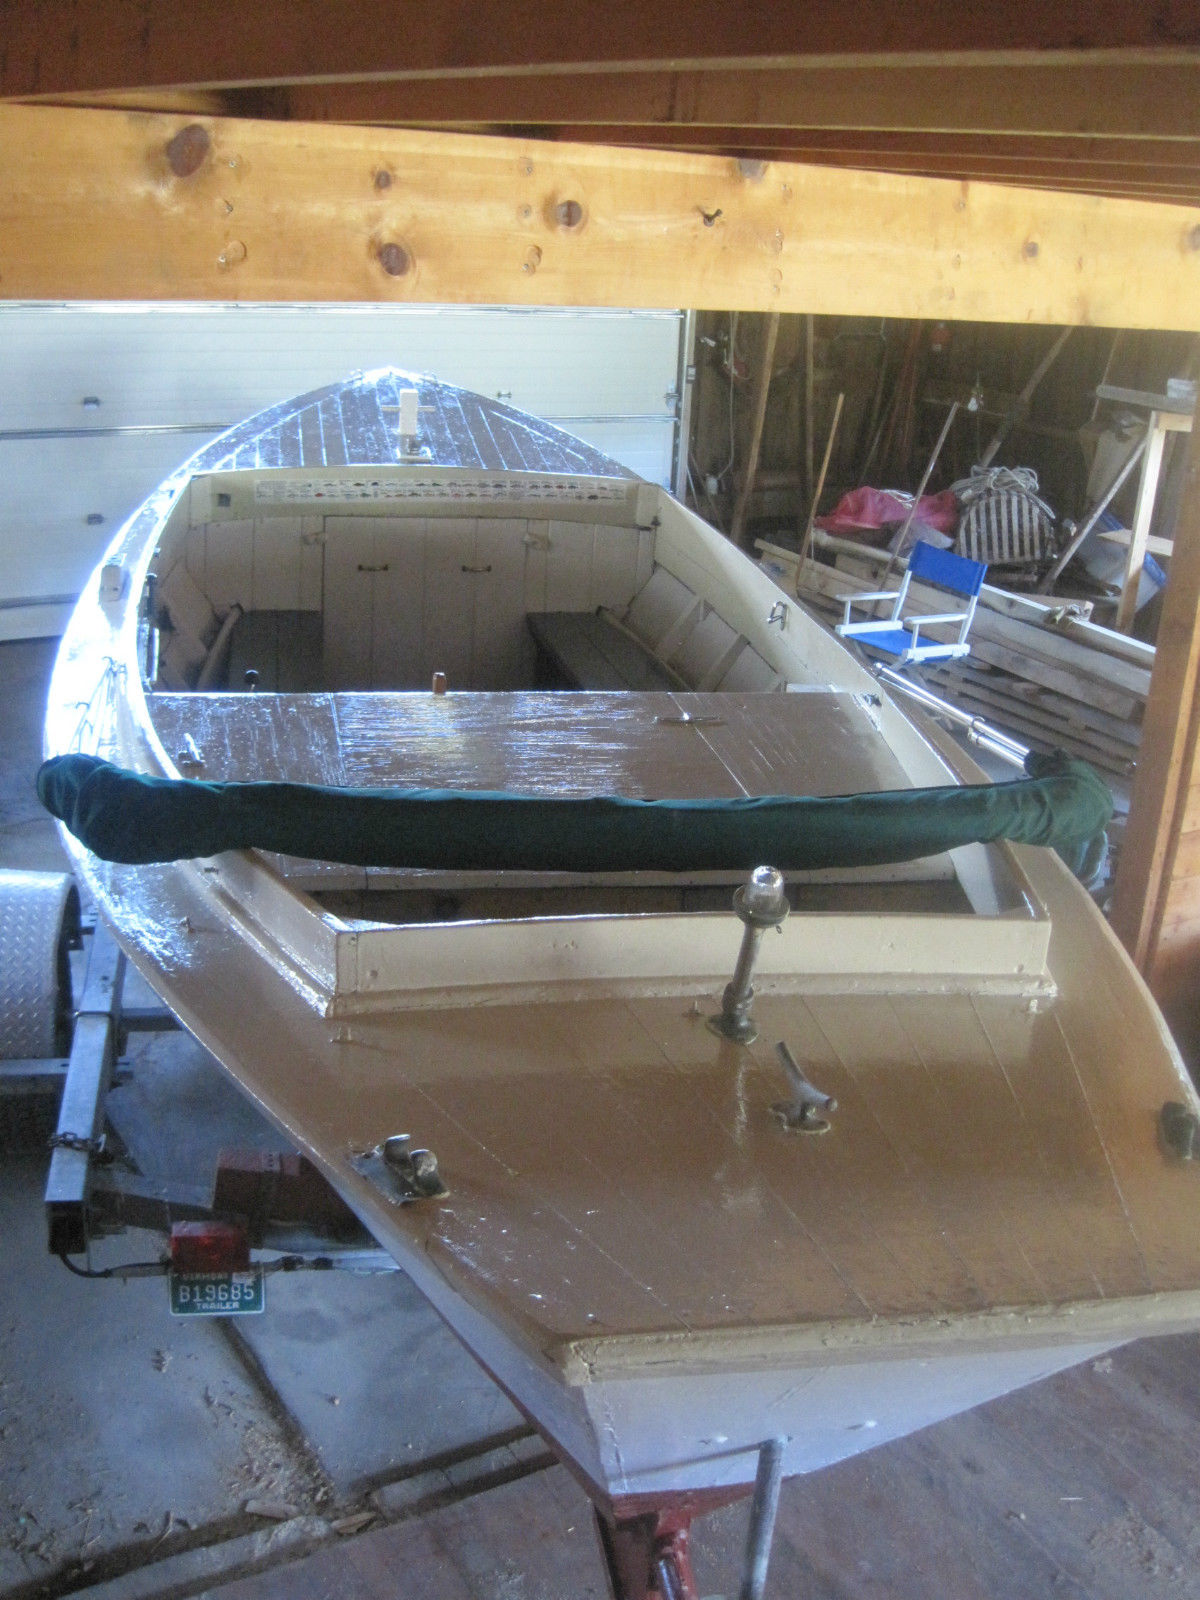 Wooden Dory 1960 for sale for $12,000 - Boats-from-USA.com